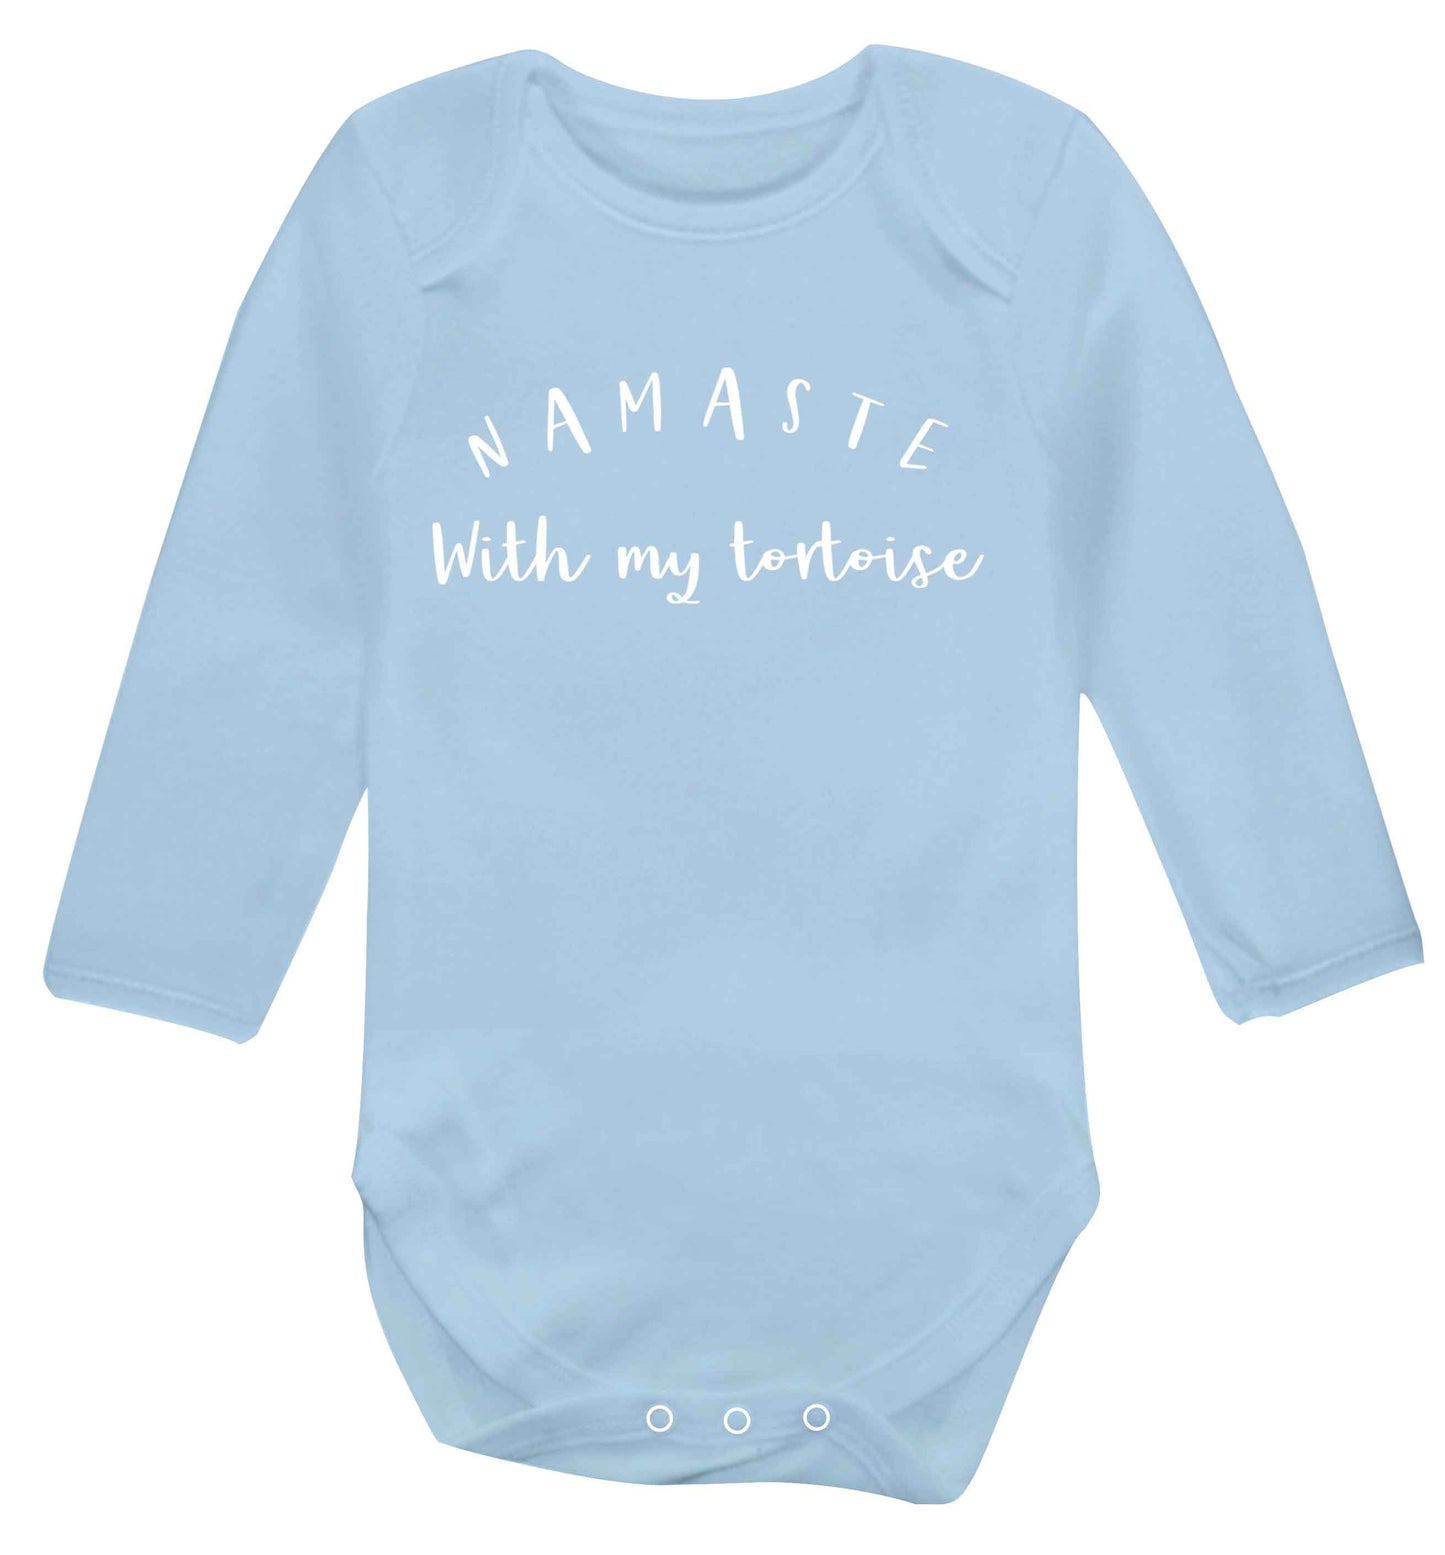 Namaste with my tortoise Baby Vest long sleeved pale blue 6-12 months